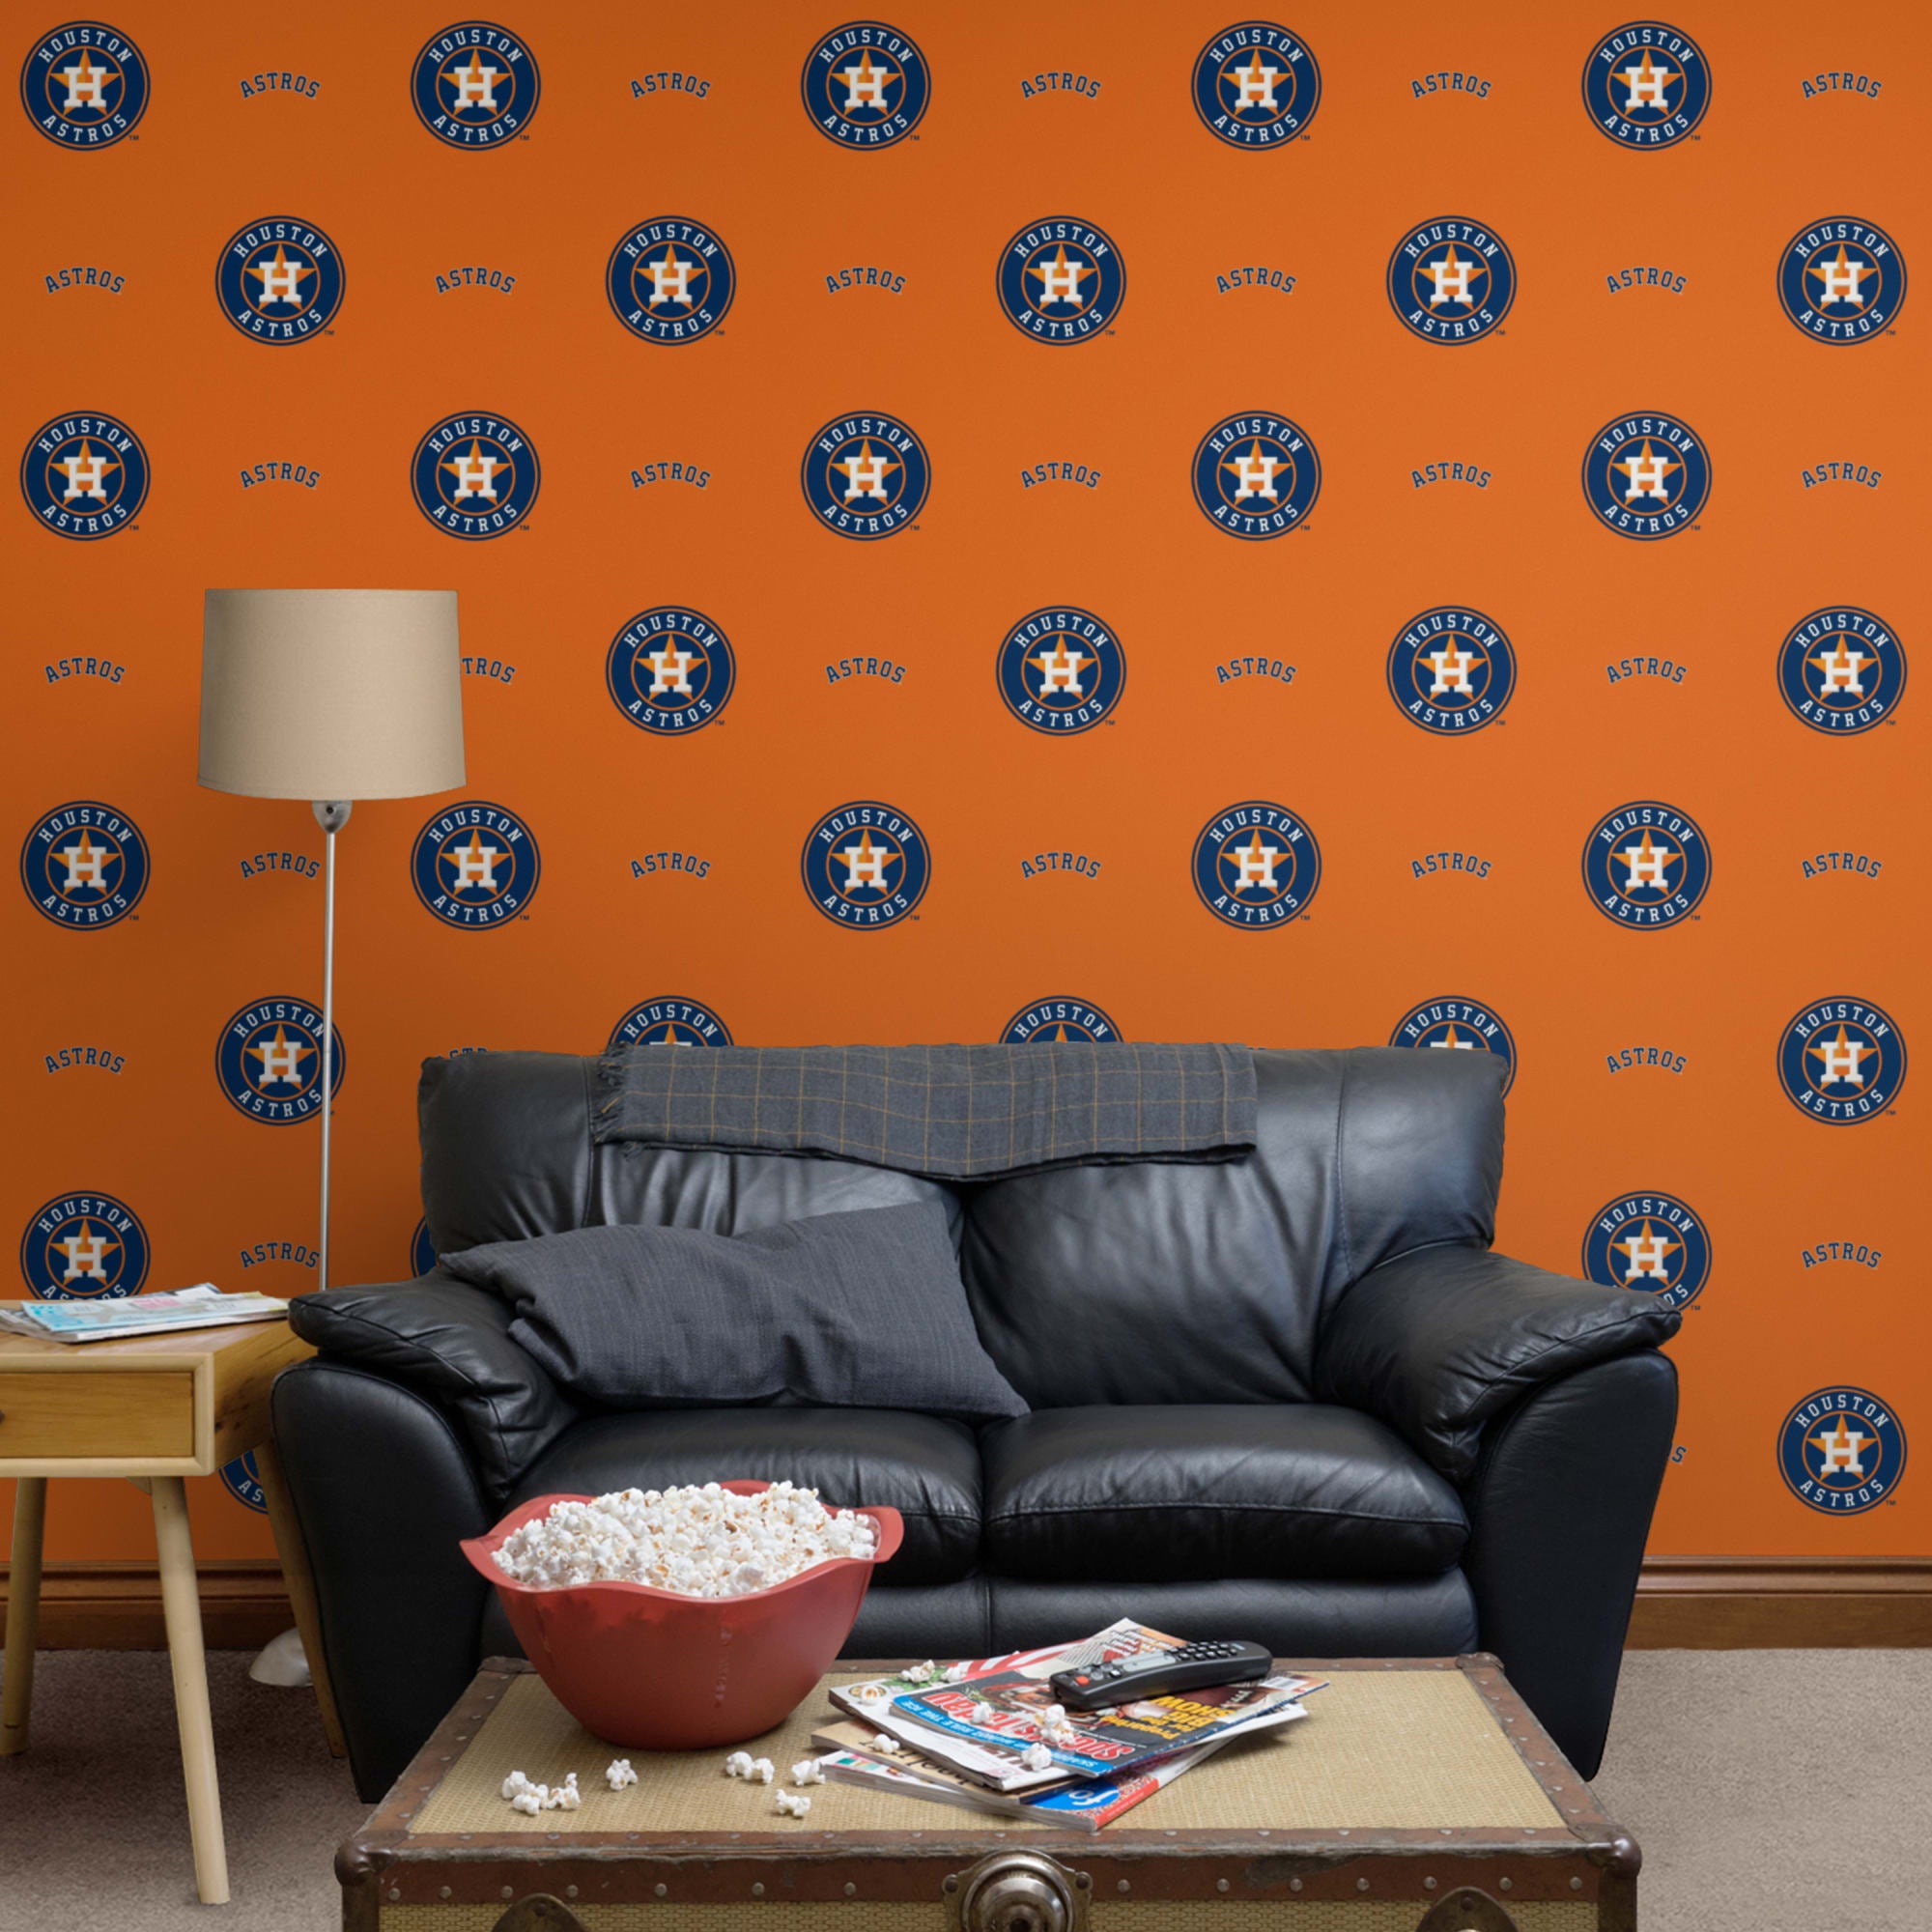 Houston Astros: Logo Pattern - Officially Licensed Removable Wallpaper 12" x 12" Sample by Fathead